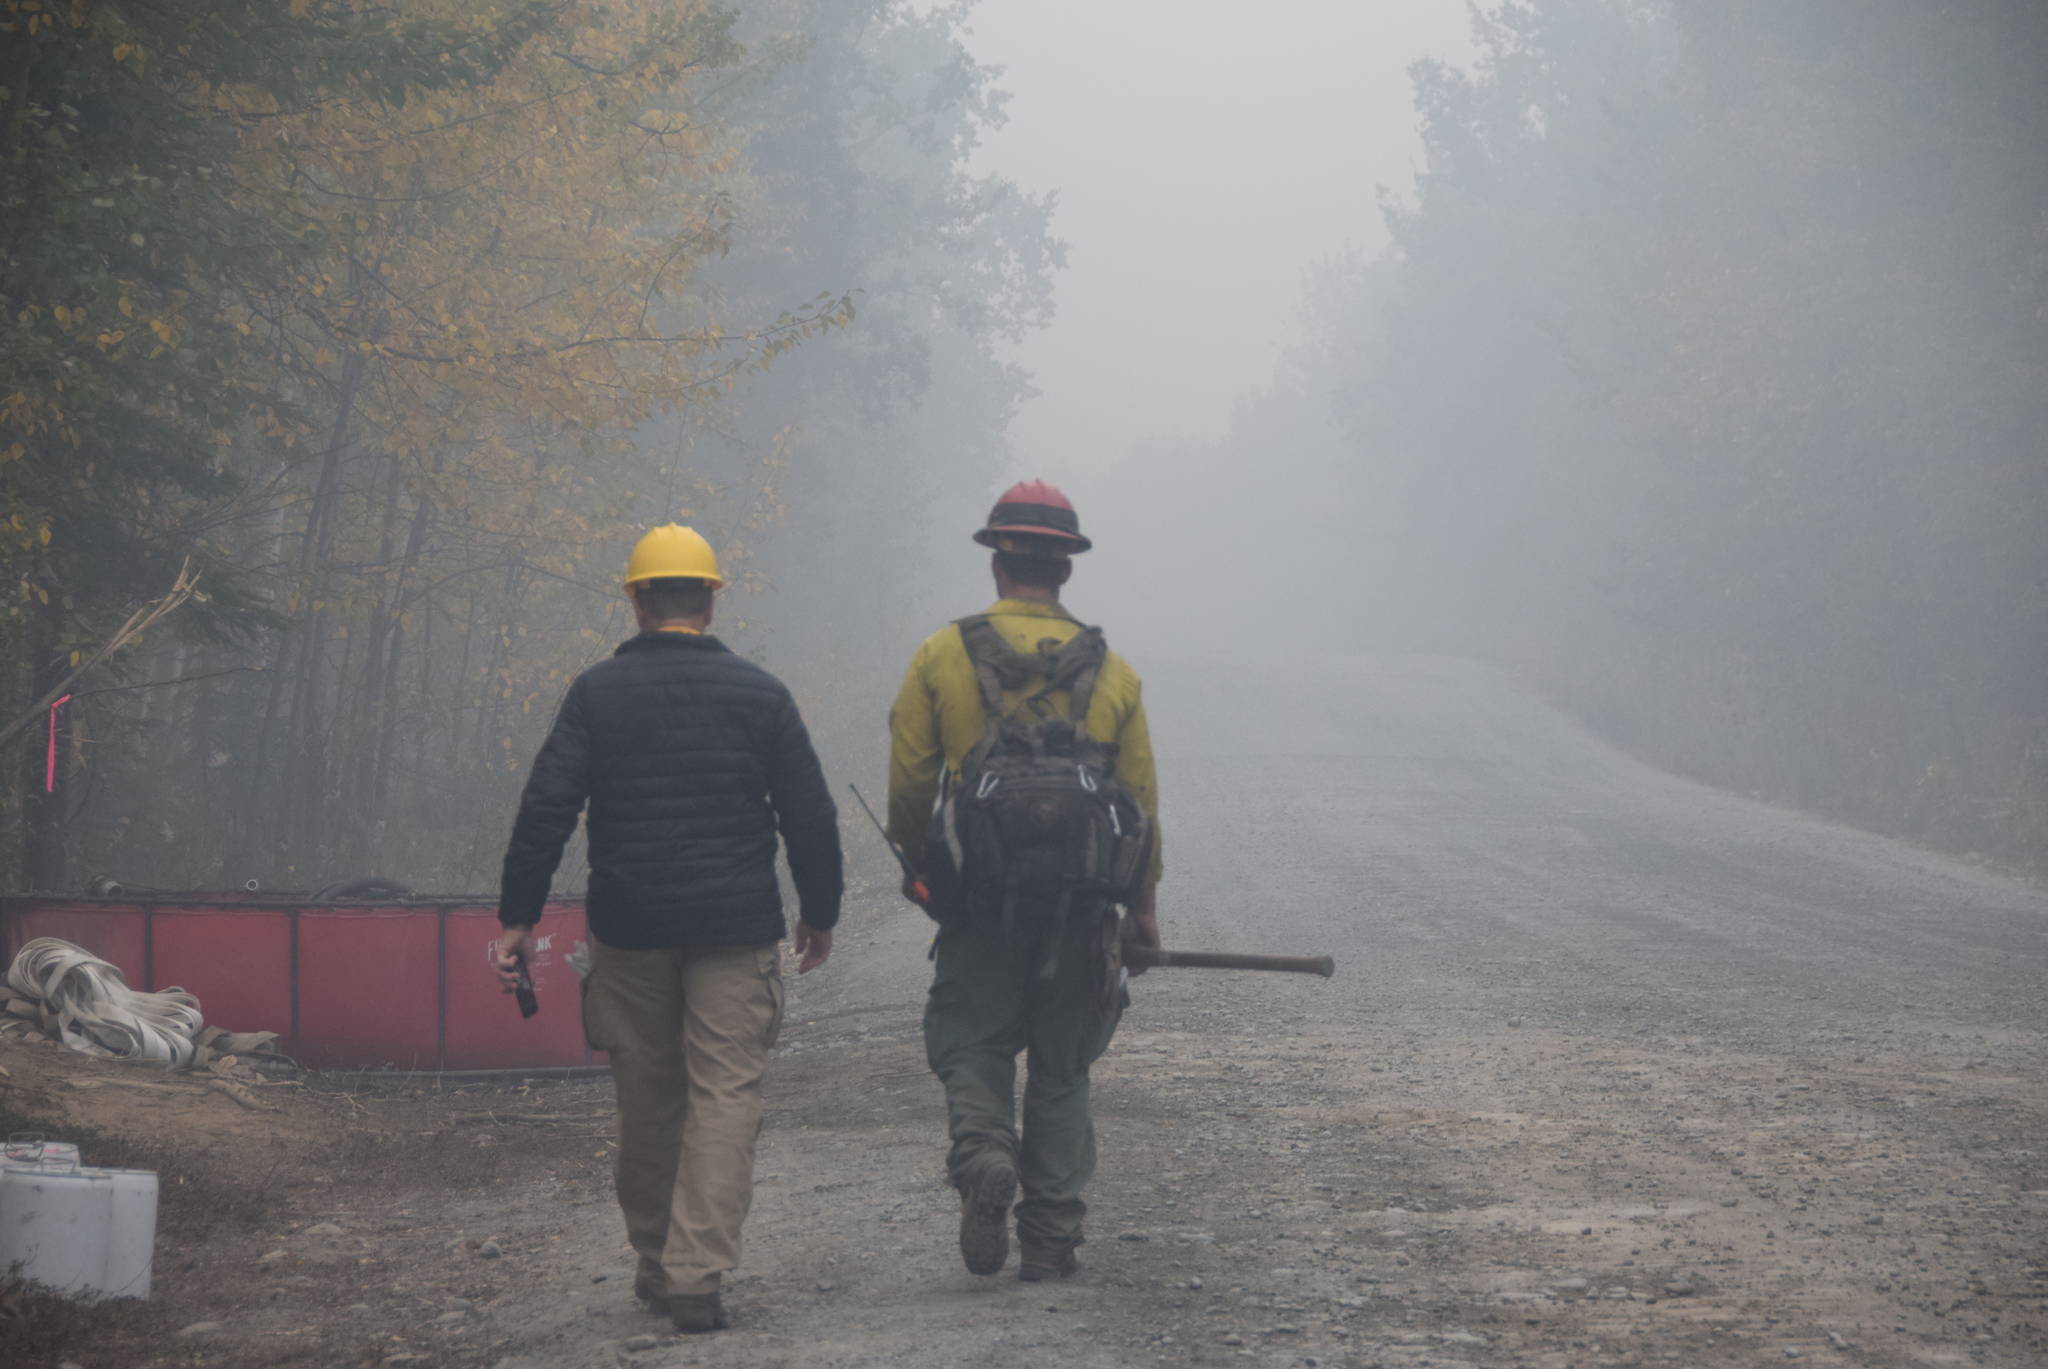 Public information officer Brian Scott, left, and Division Charlie supervisor Kip Shields, right, make their way to the nearest drop point on Skilak Lake Road on Aug. 30, 2019. (Photo by Brian Mazurek/Peninsula Clarion)